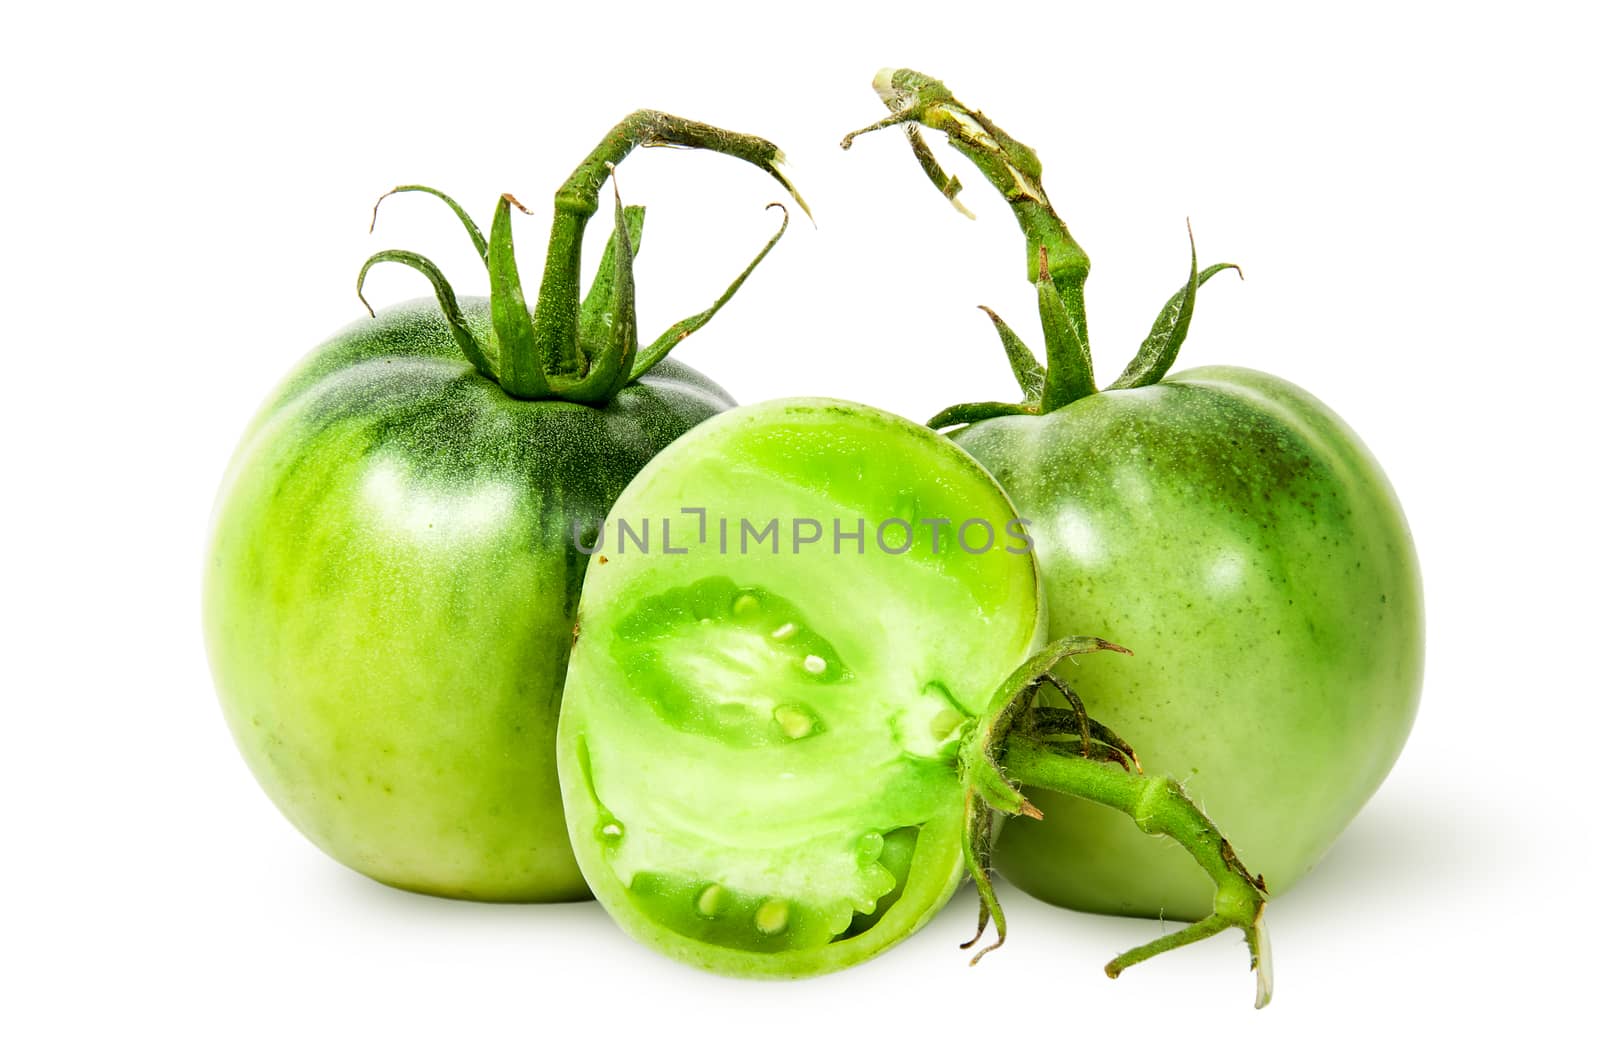 Two whole and half green tomatoes by Cipariss